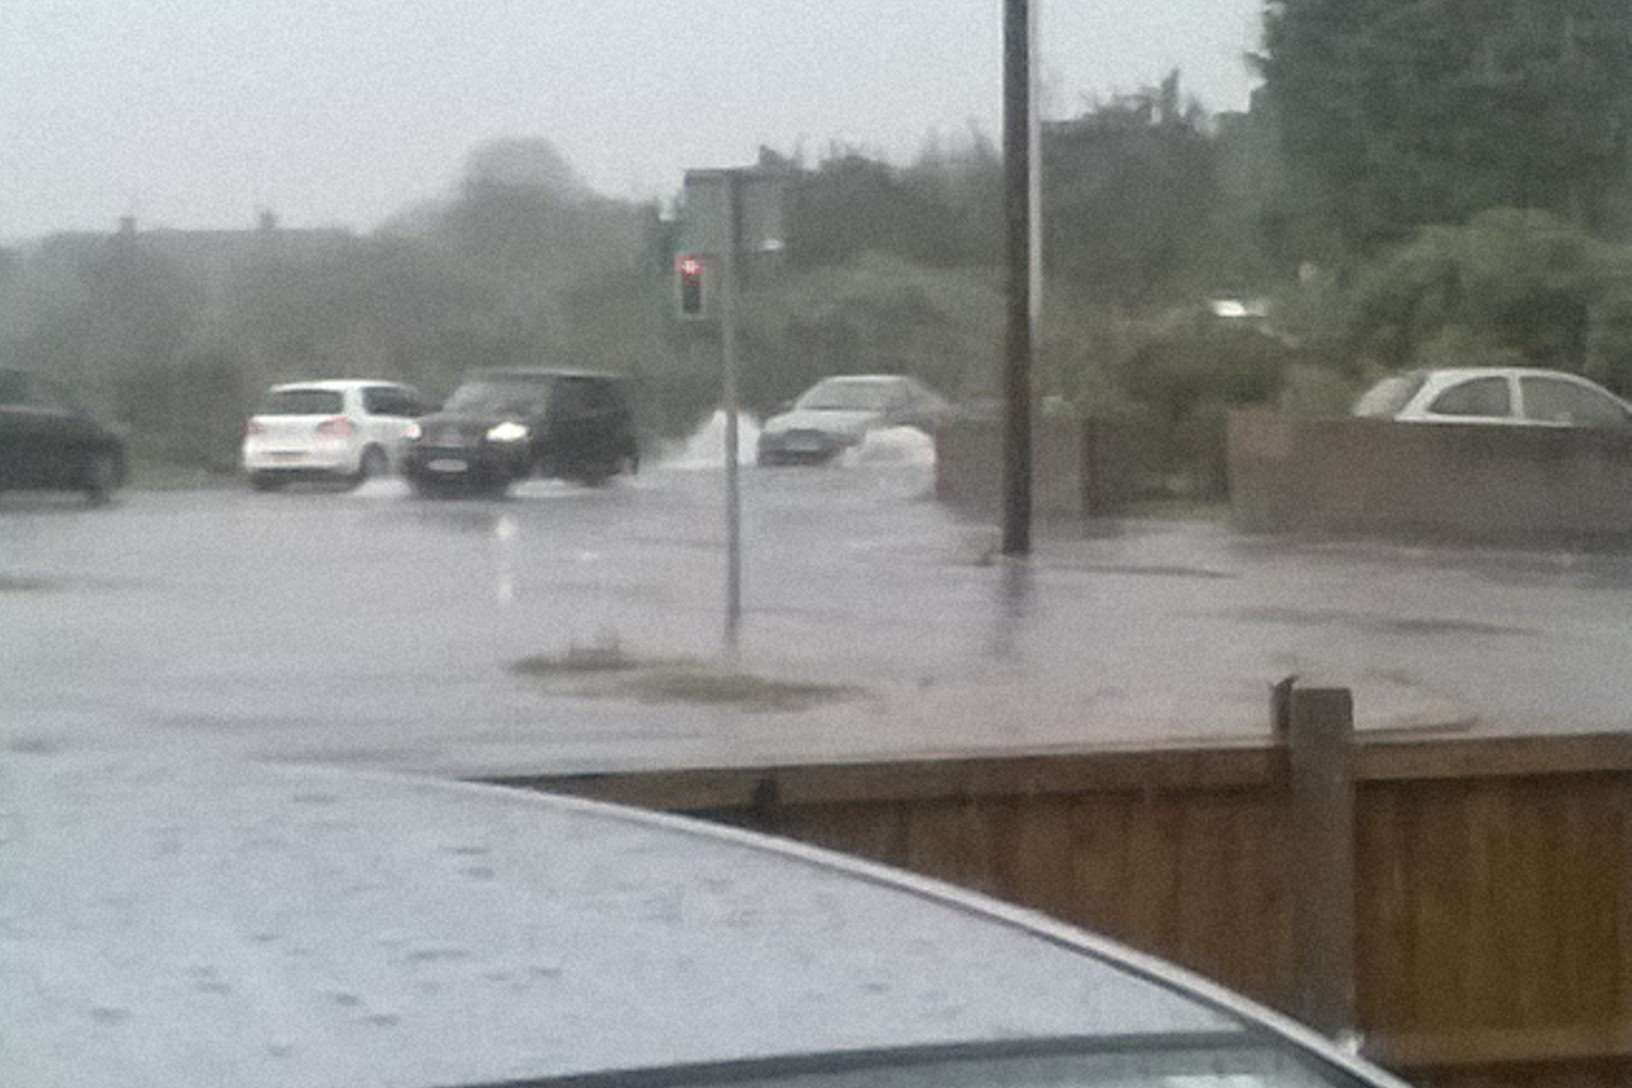 Quinton Road, Quinton became a river in flash floods today